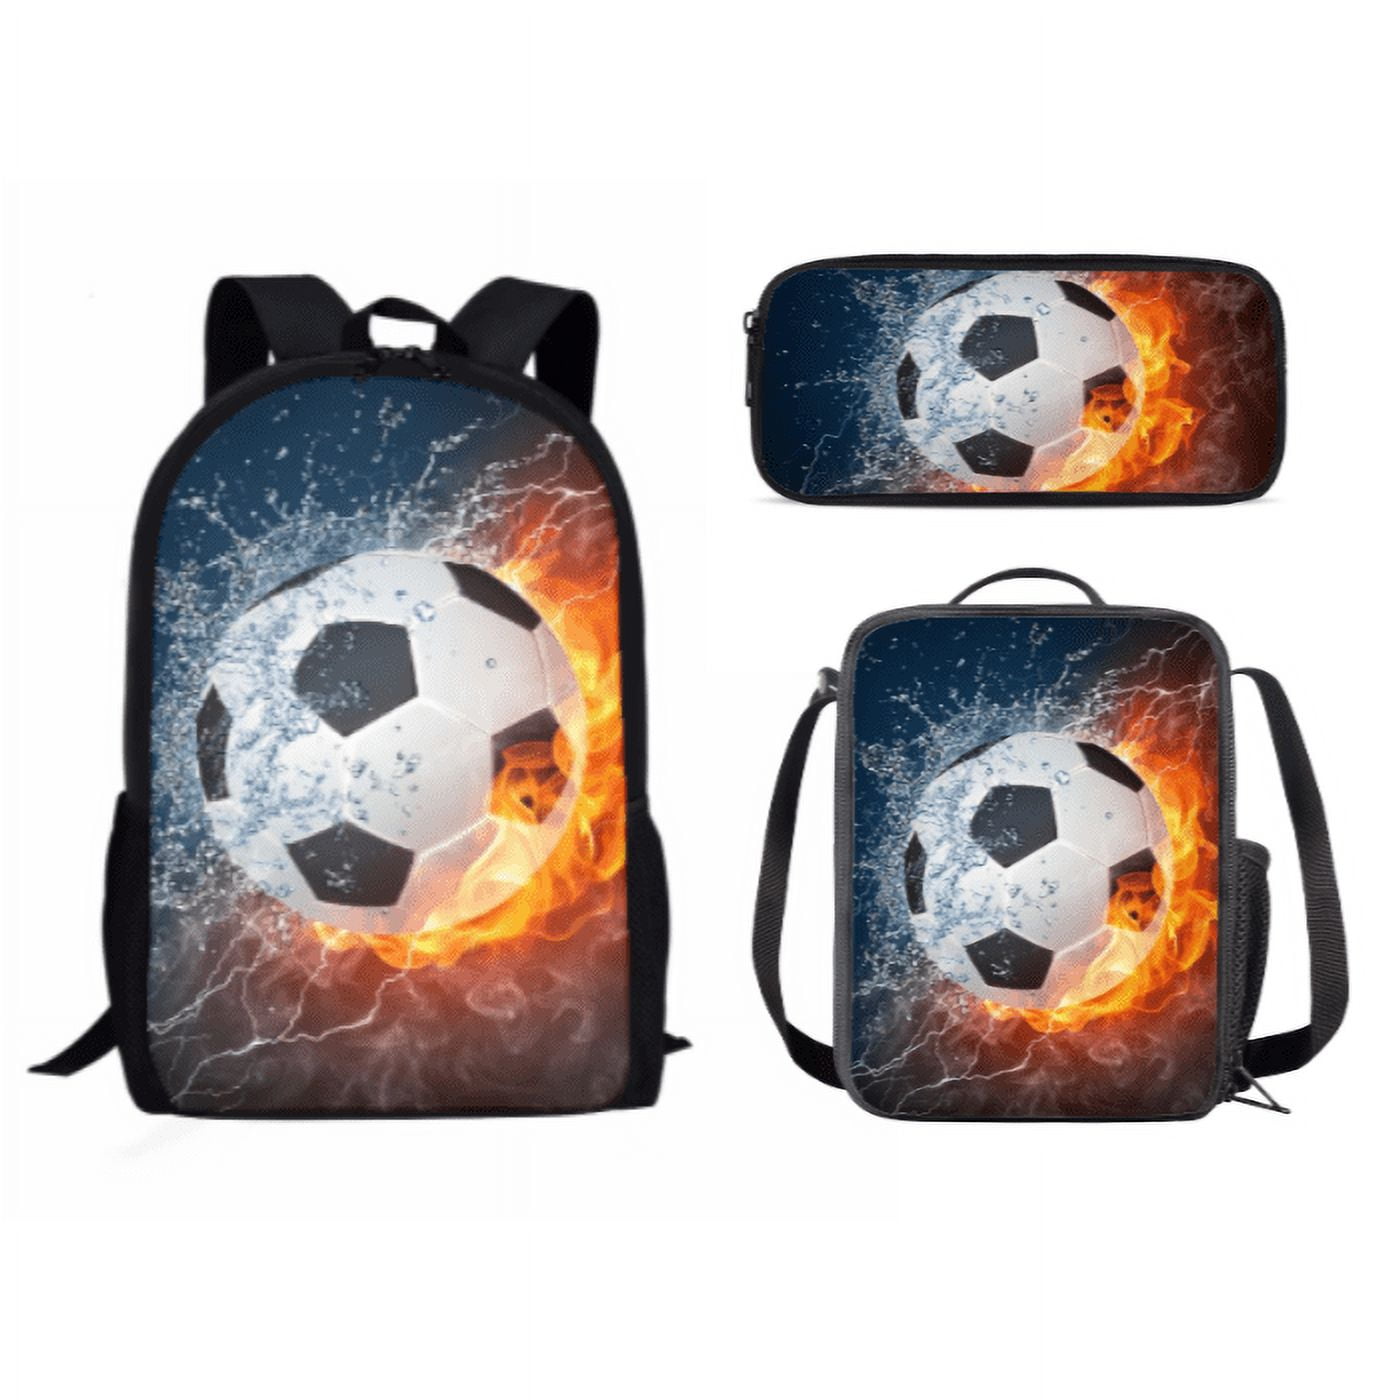 Sport Ball Basketball Lunch Box Portable Insulated Lunch Bag Mini